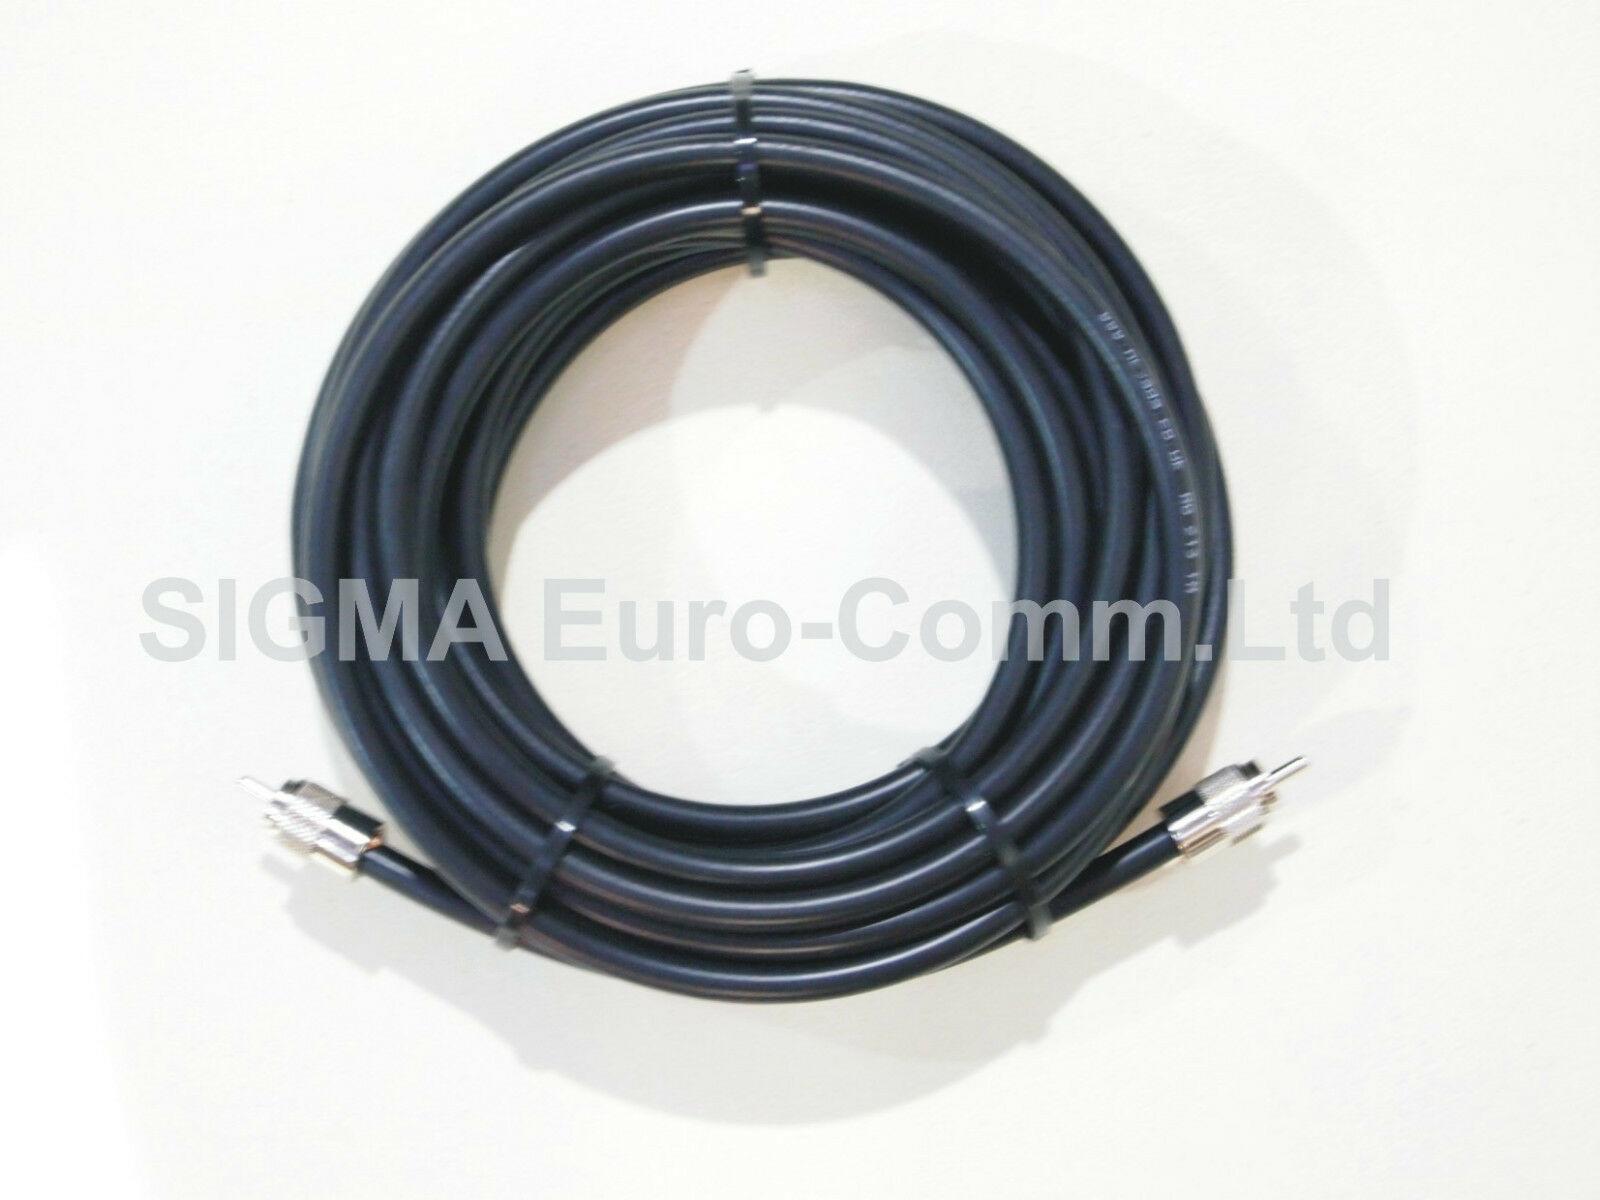 Sigma RG213 Low Loss 50 Ohm Coaxial Cable 2m Fitted With 2 x PL259 Male Connectors